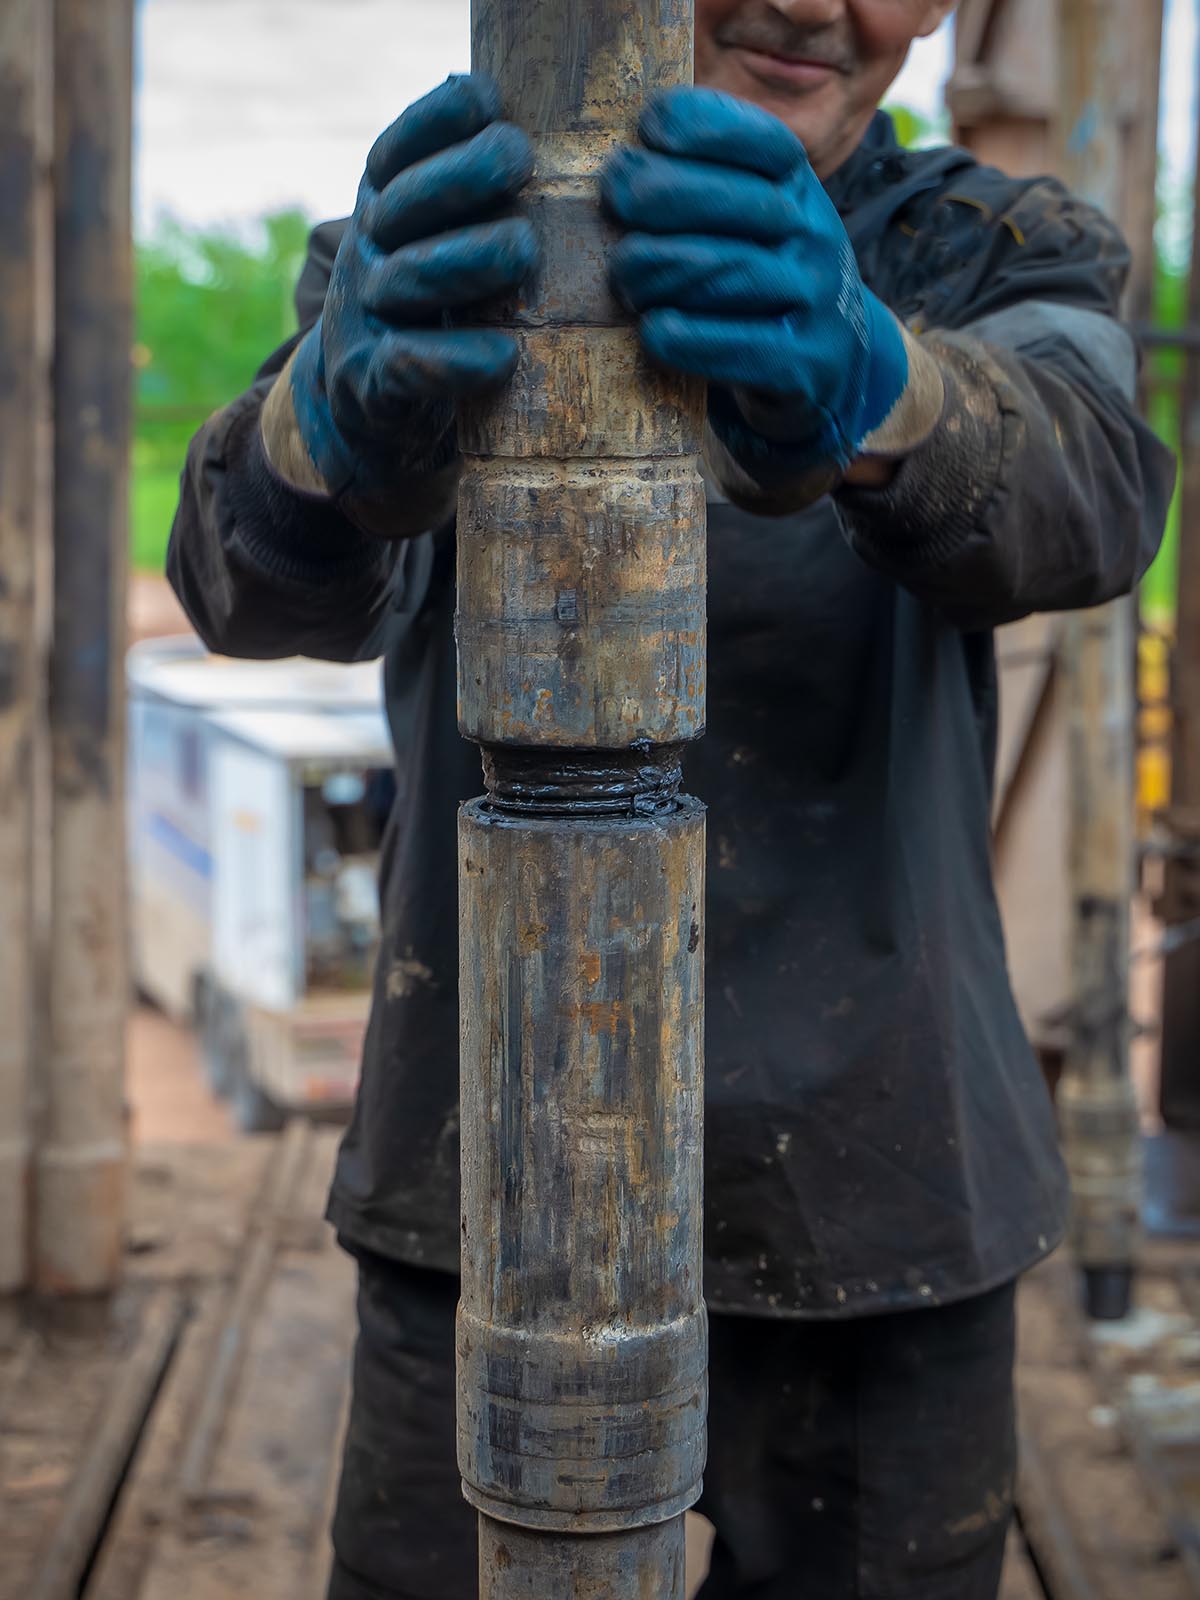 Oil rig worker prepare tool and equipment for perforation oil and gas well at wellhead platform. Making up a drill pipe connection. A view for drill pipe connection from between the stands